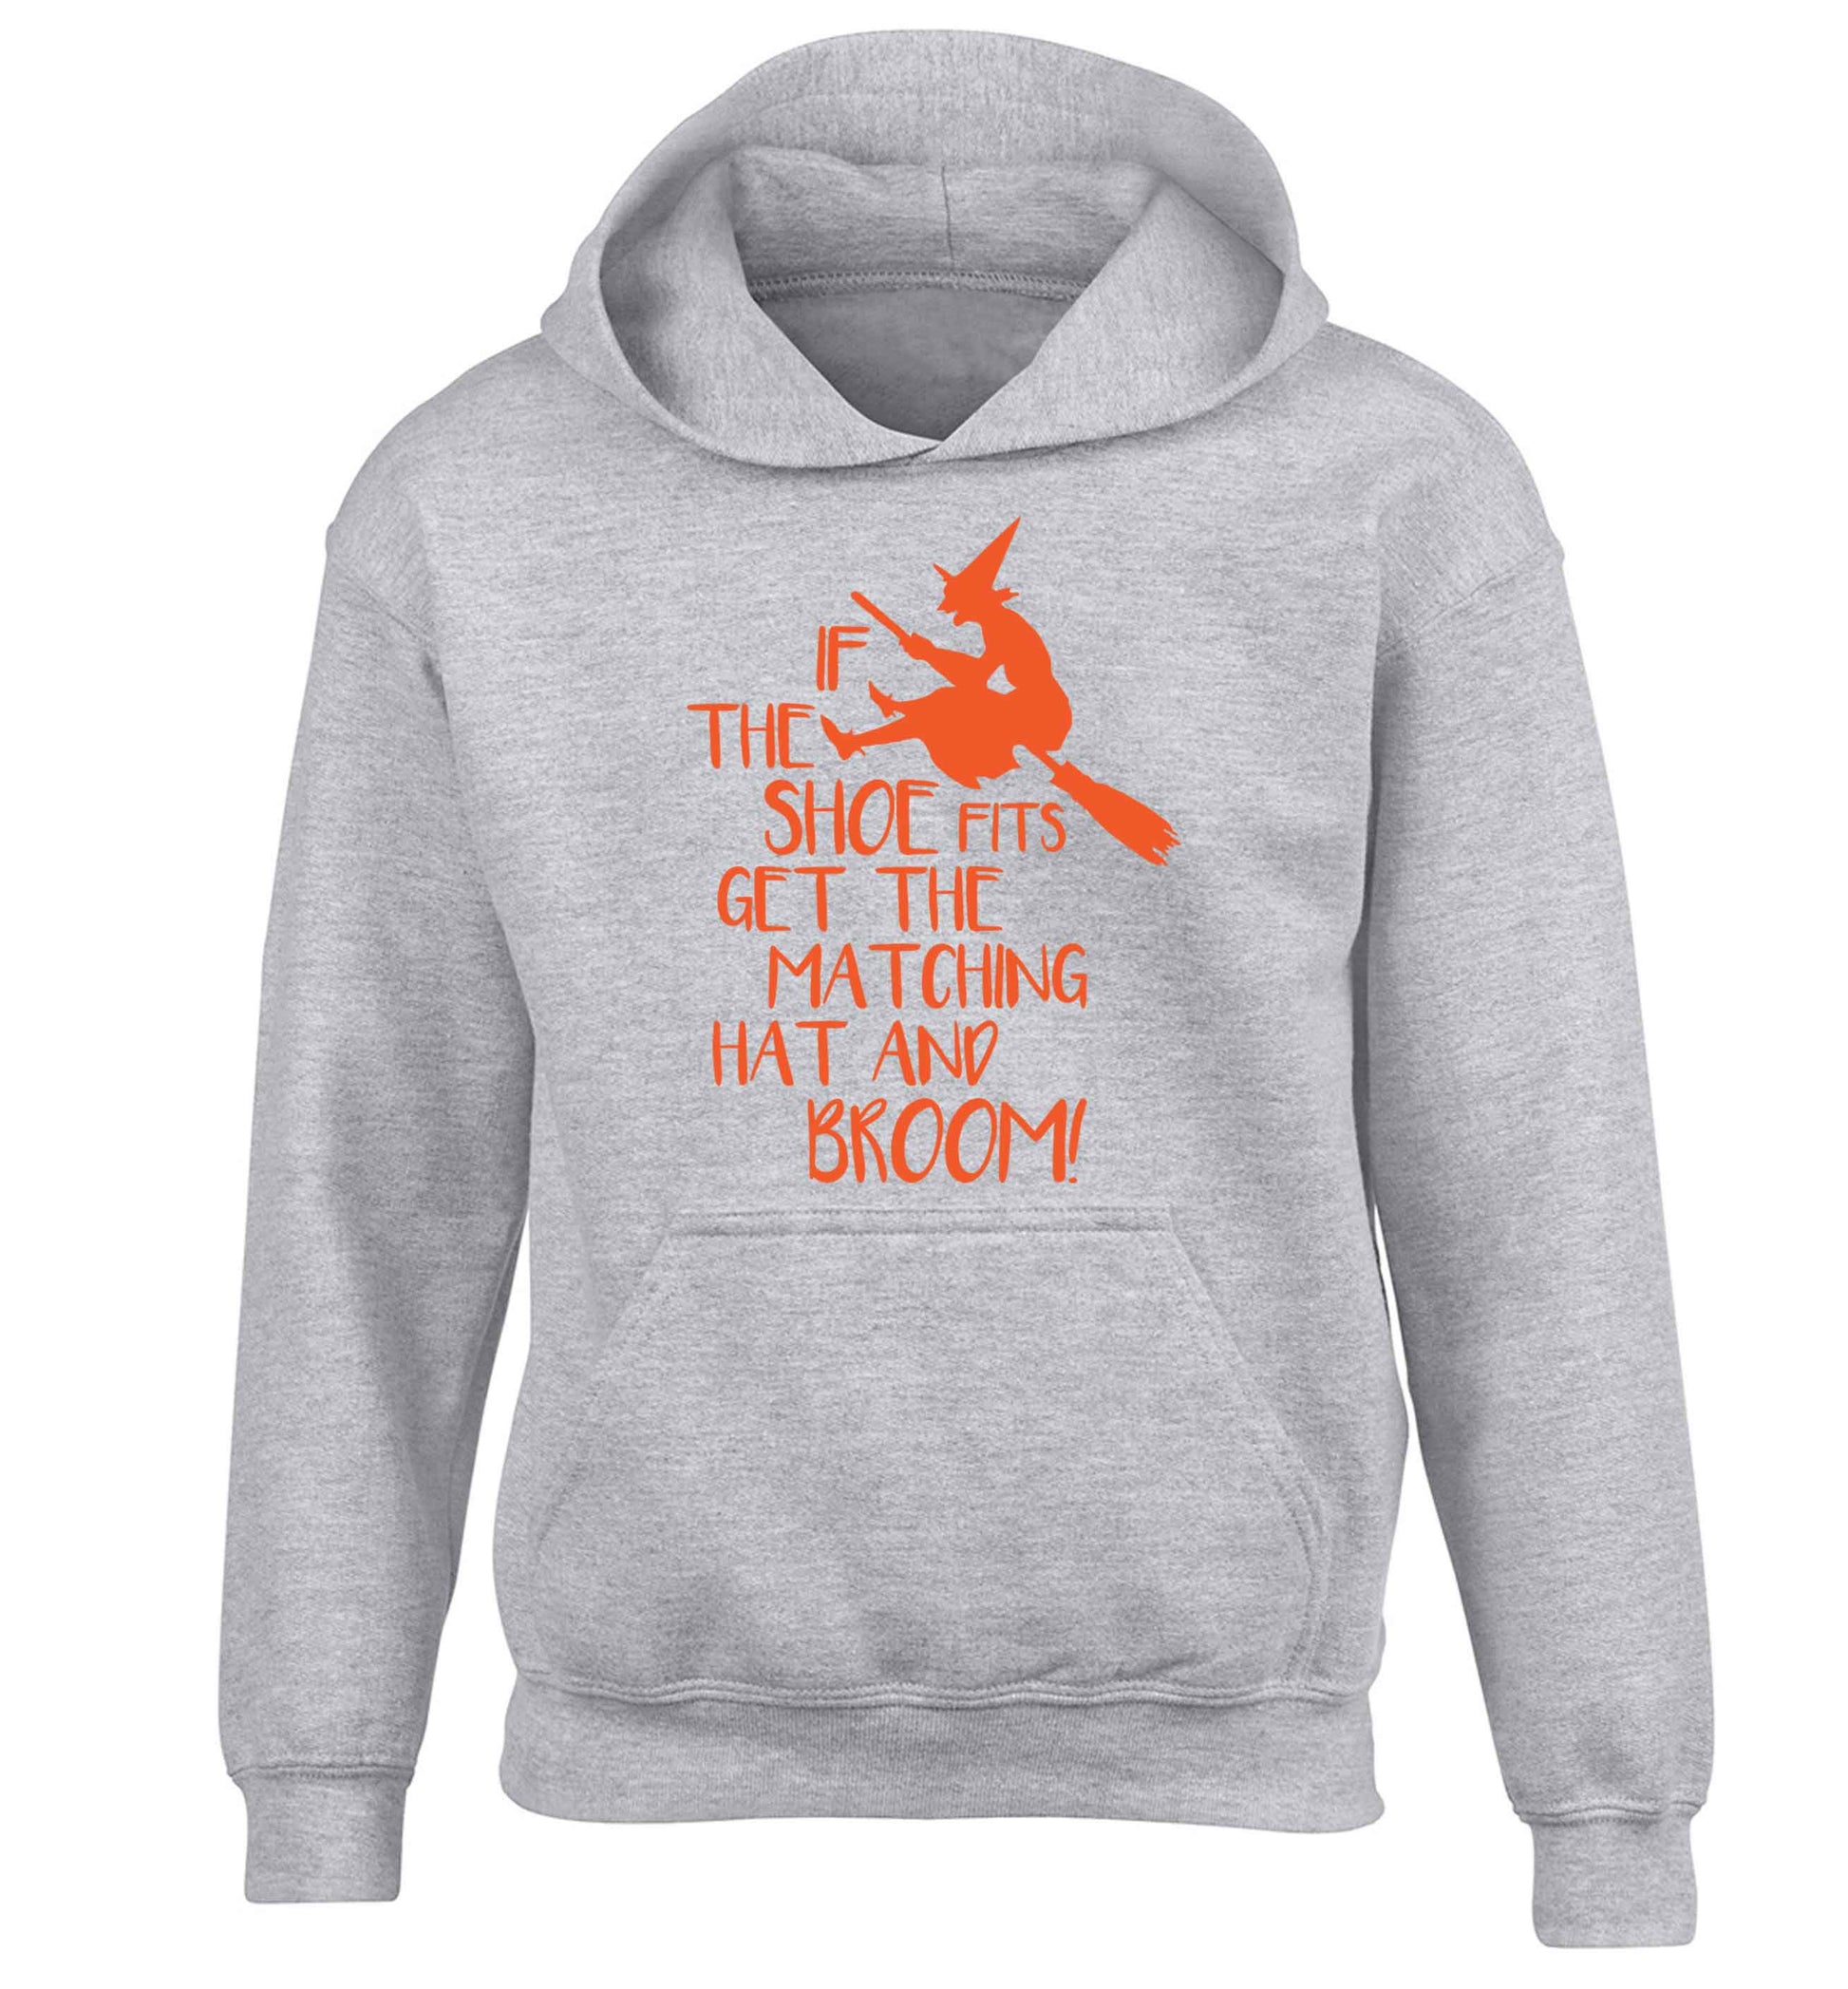 If the shoe fits get the matching hat and broom children's grey hoodie 12-13 Years